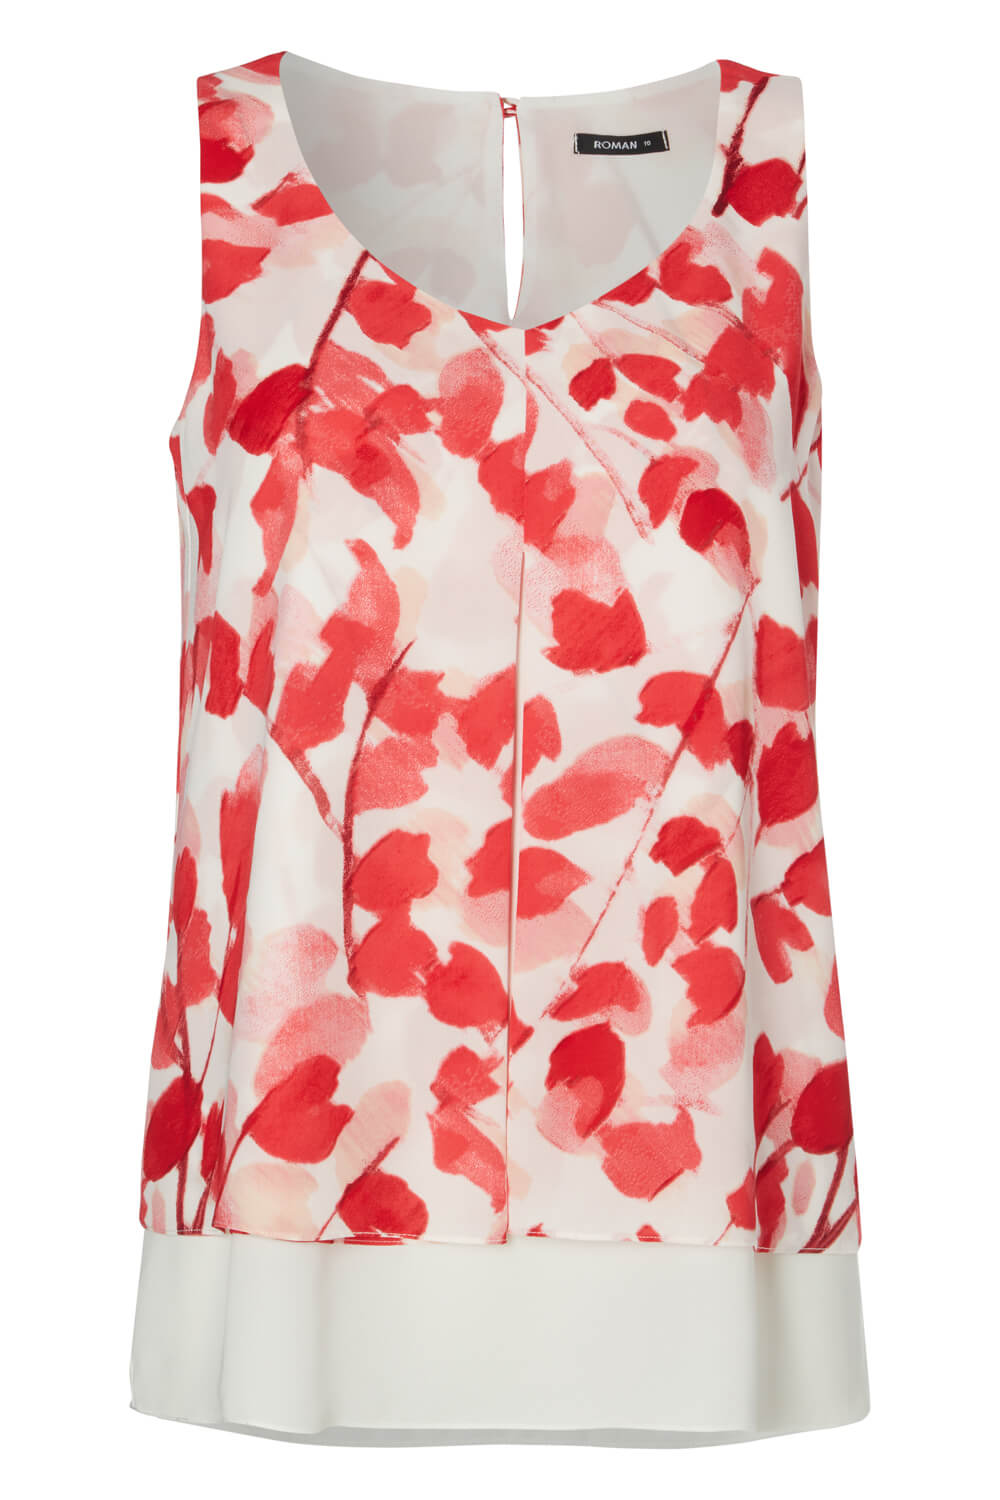 Red Floral Print Pleat Layered Top, Image 4 of 4